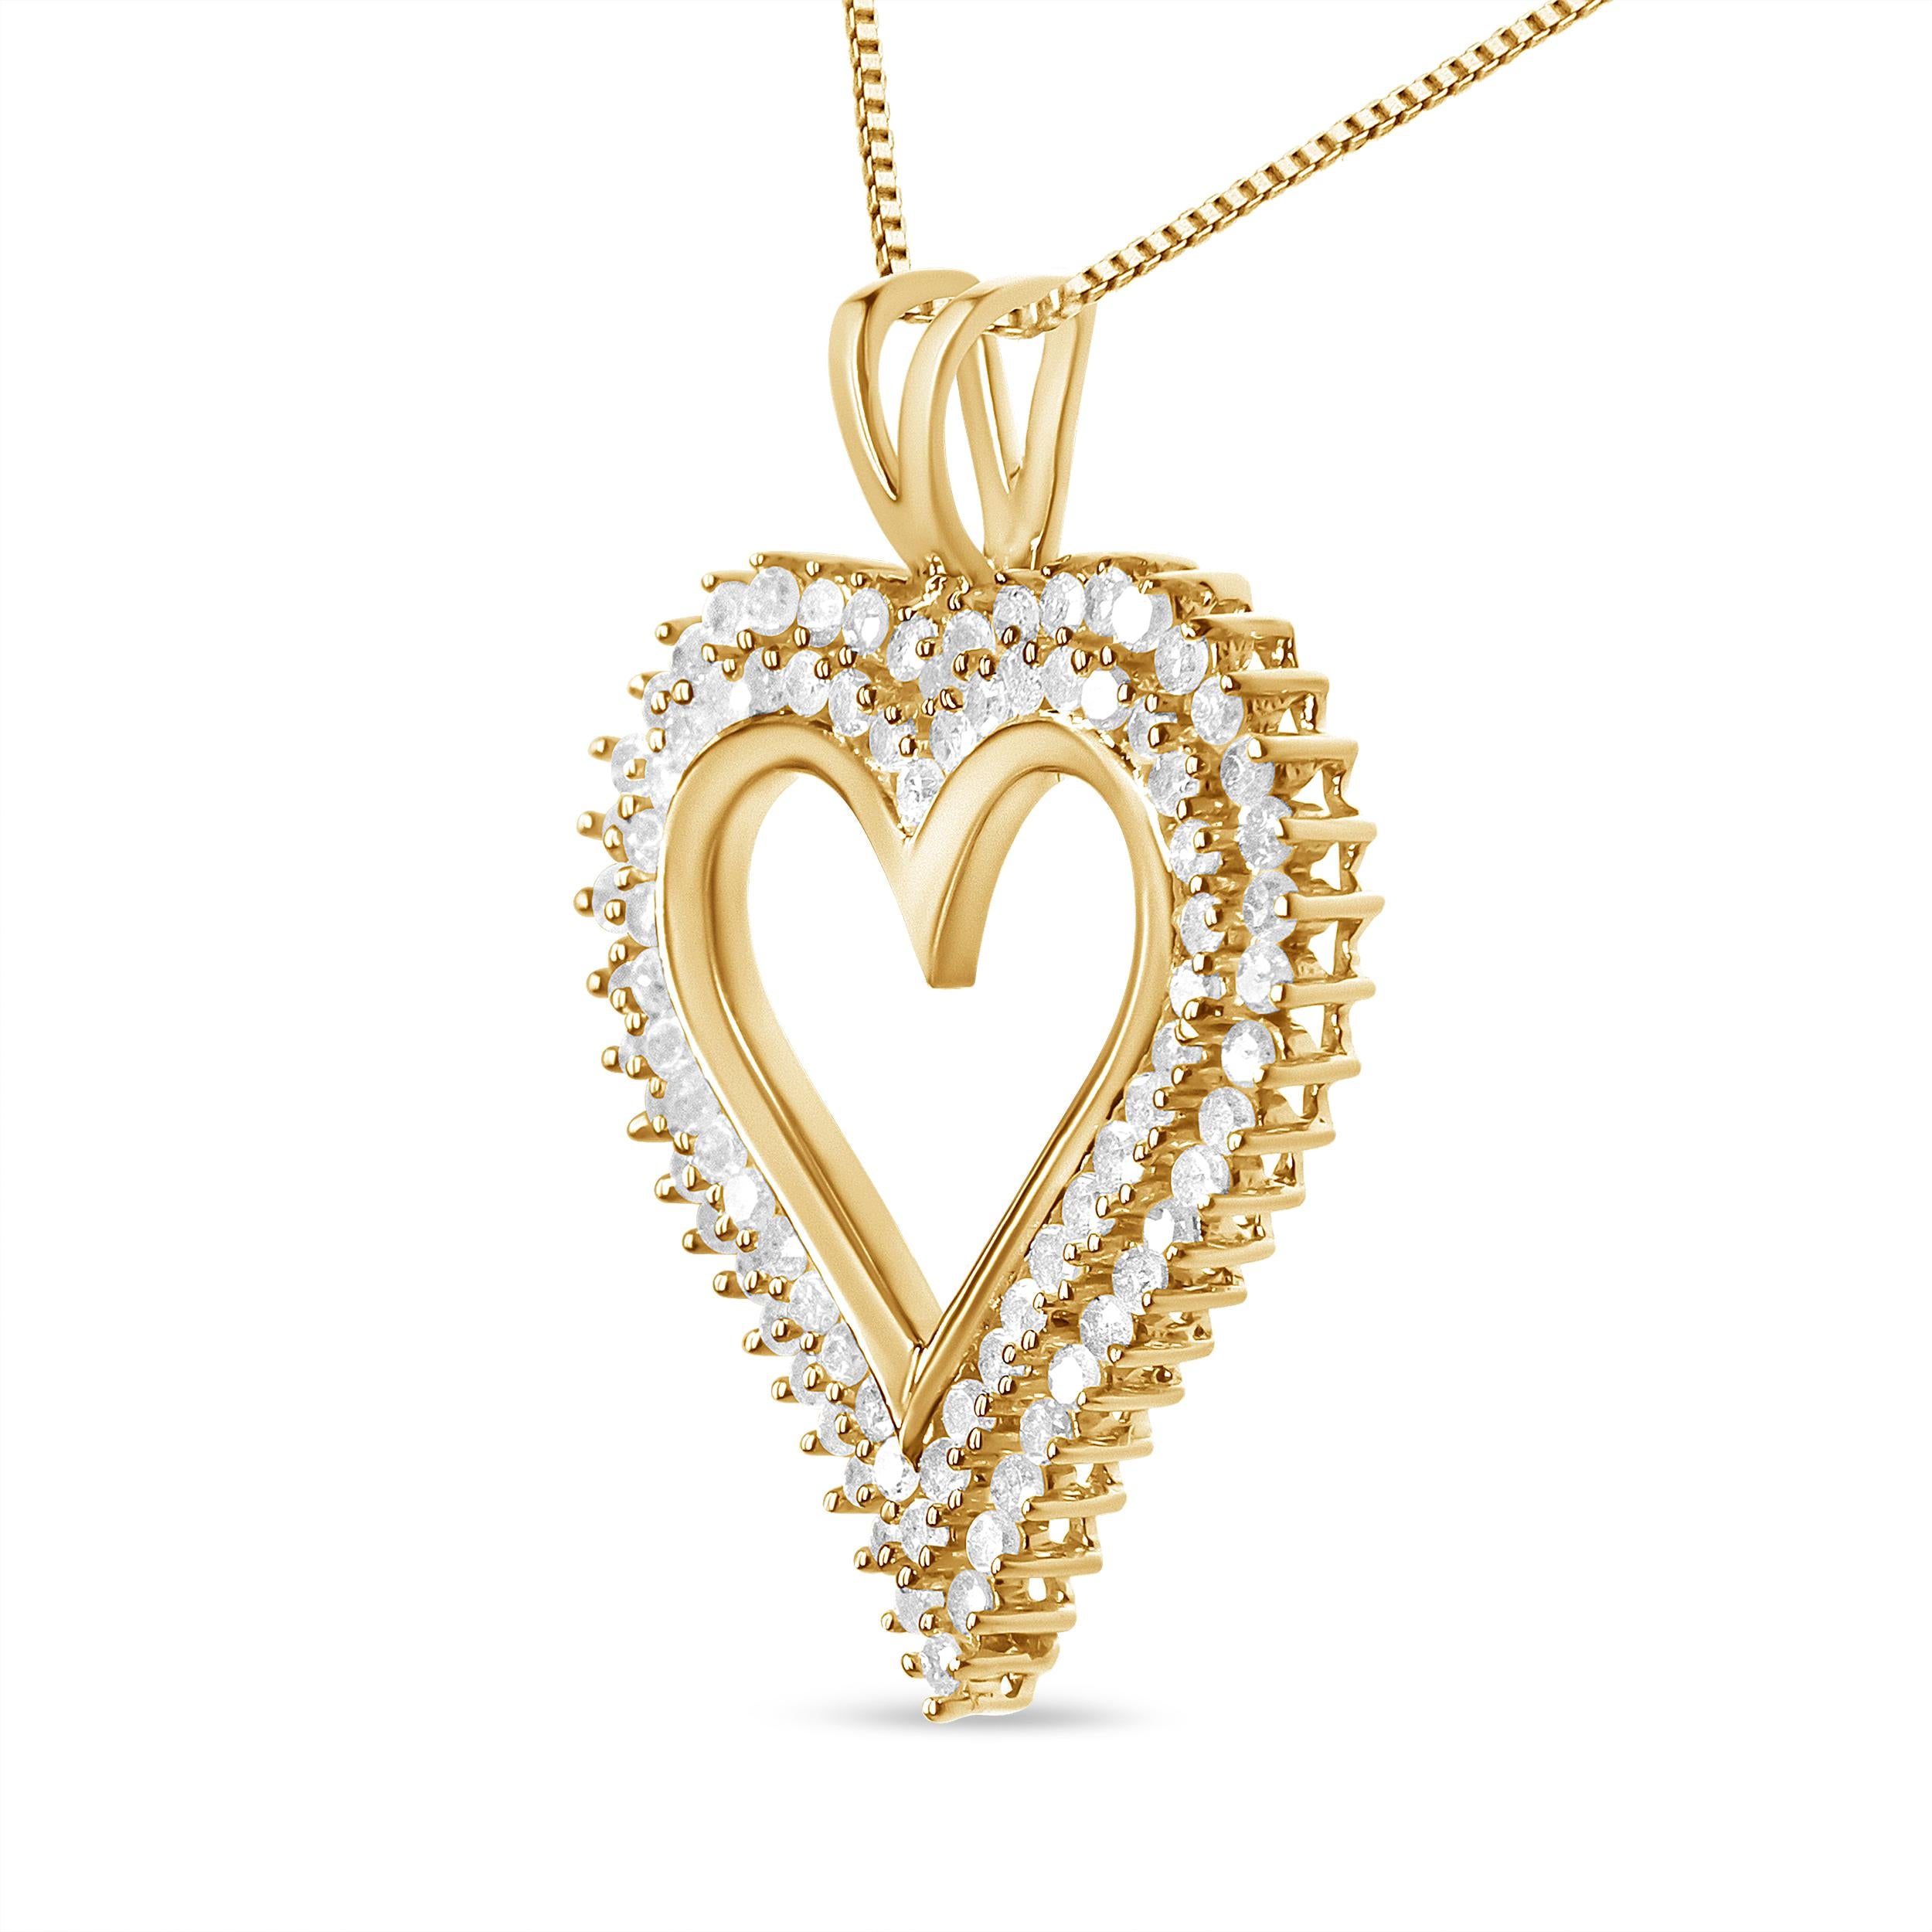 10K Yellow Gold Plated Sterling Silver 2.0 Carat Diamond Heart Pendant Necklace In New Condition For Sale In New York, NY